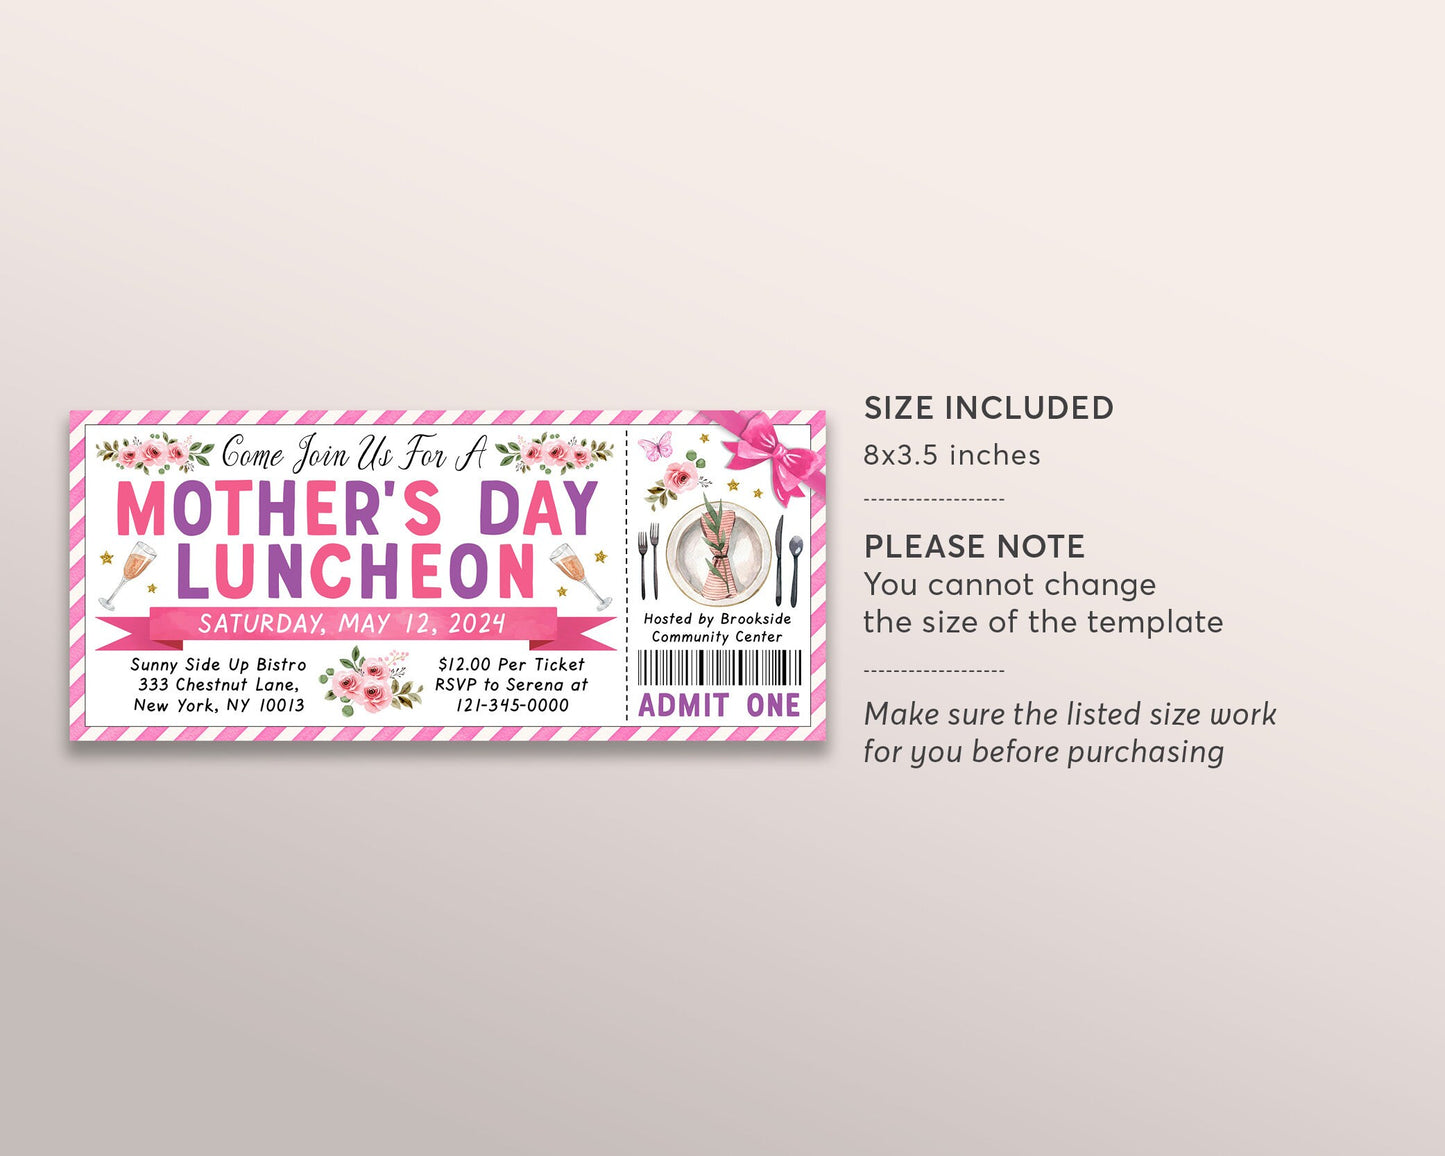 Mother's Day Luncheon Ticket Invitation Editable Template, Mothers Day Floral Lunch Brunch Ticket, Mother Daughter Celebration Invite